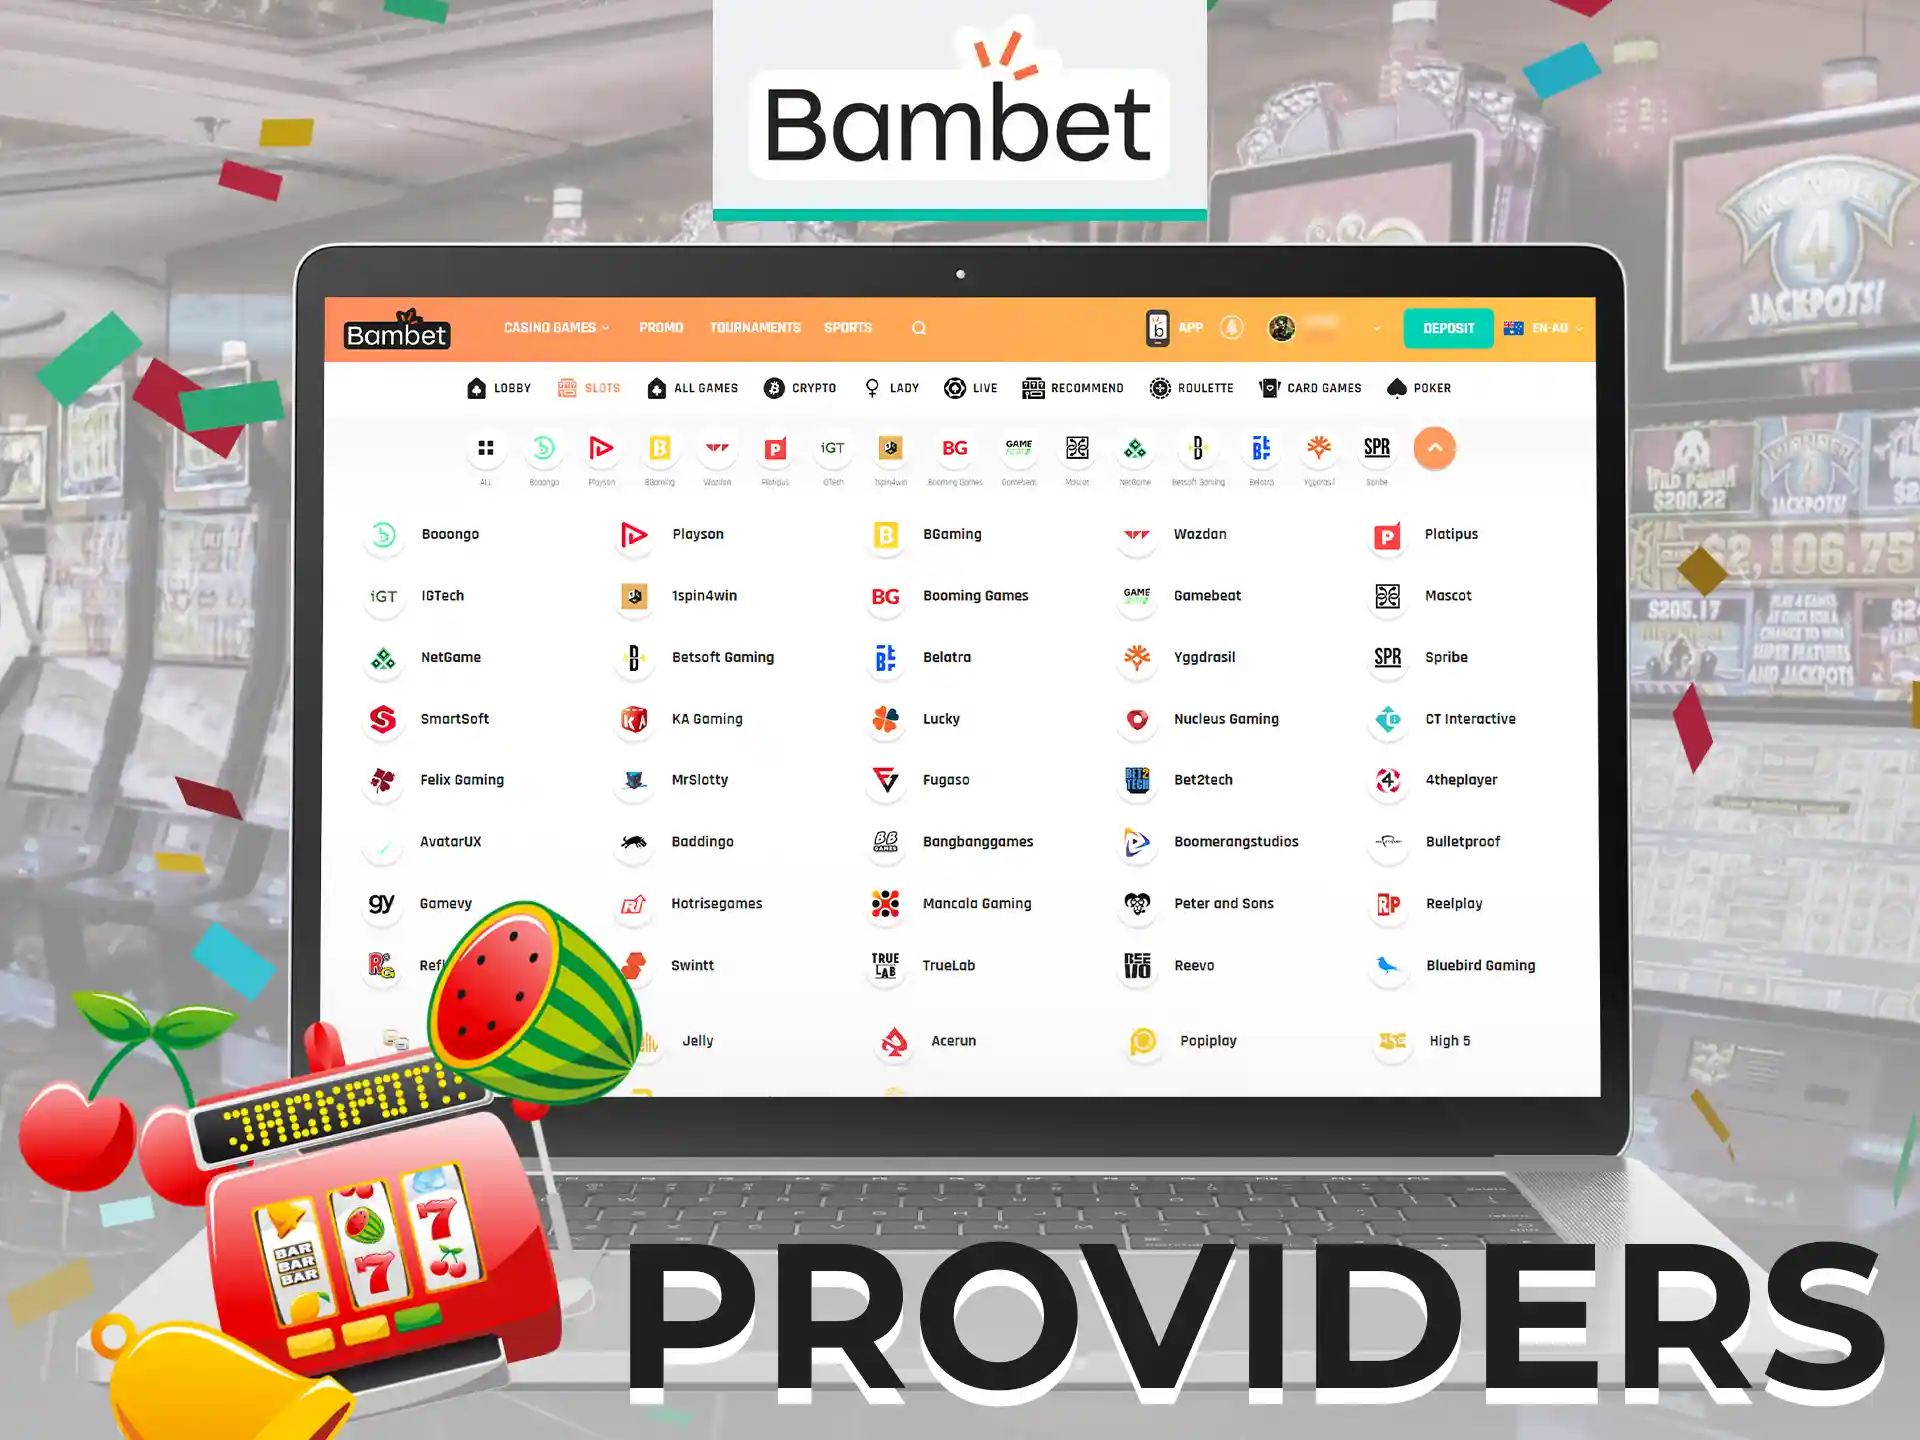 Bambet has a huge selection of casino game providers in Australia.